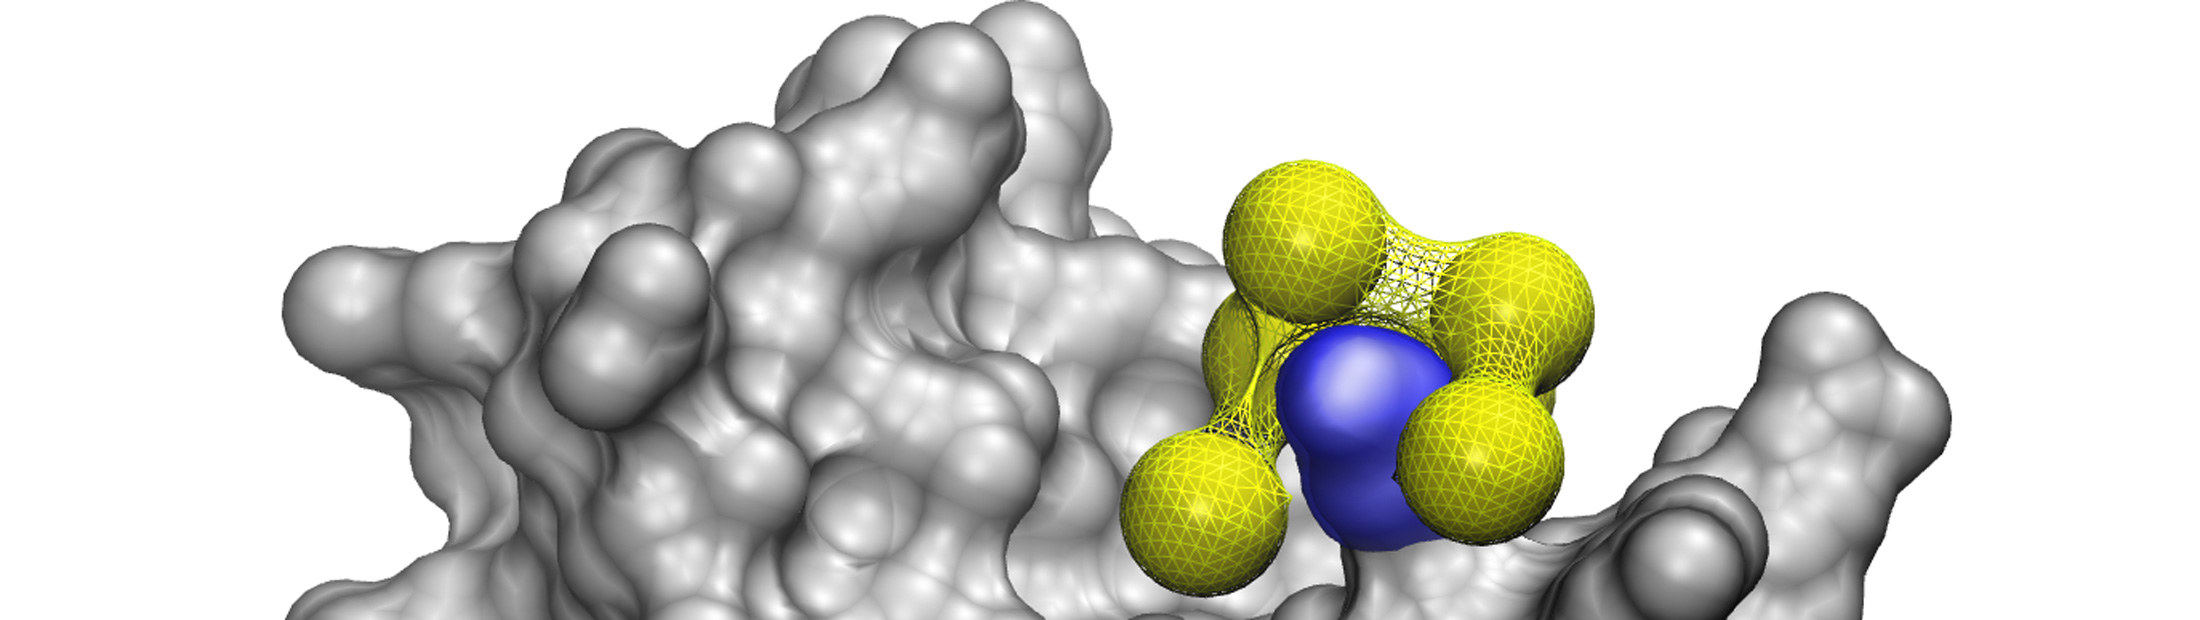 The protein appears as a lumpy gray mass, made up of hundreds of balls stuck together. One of the longer lumps has a roughly U-shaped nanoparticle, made up of six or so balls, wrapped around it. That protrusion is about two or three times the diameter of a single ball in length, and one or two in diameter.